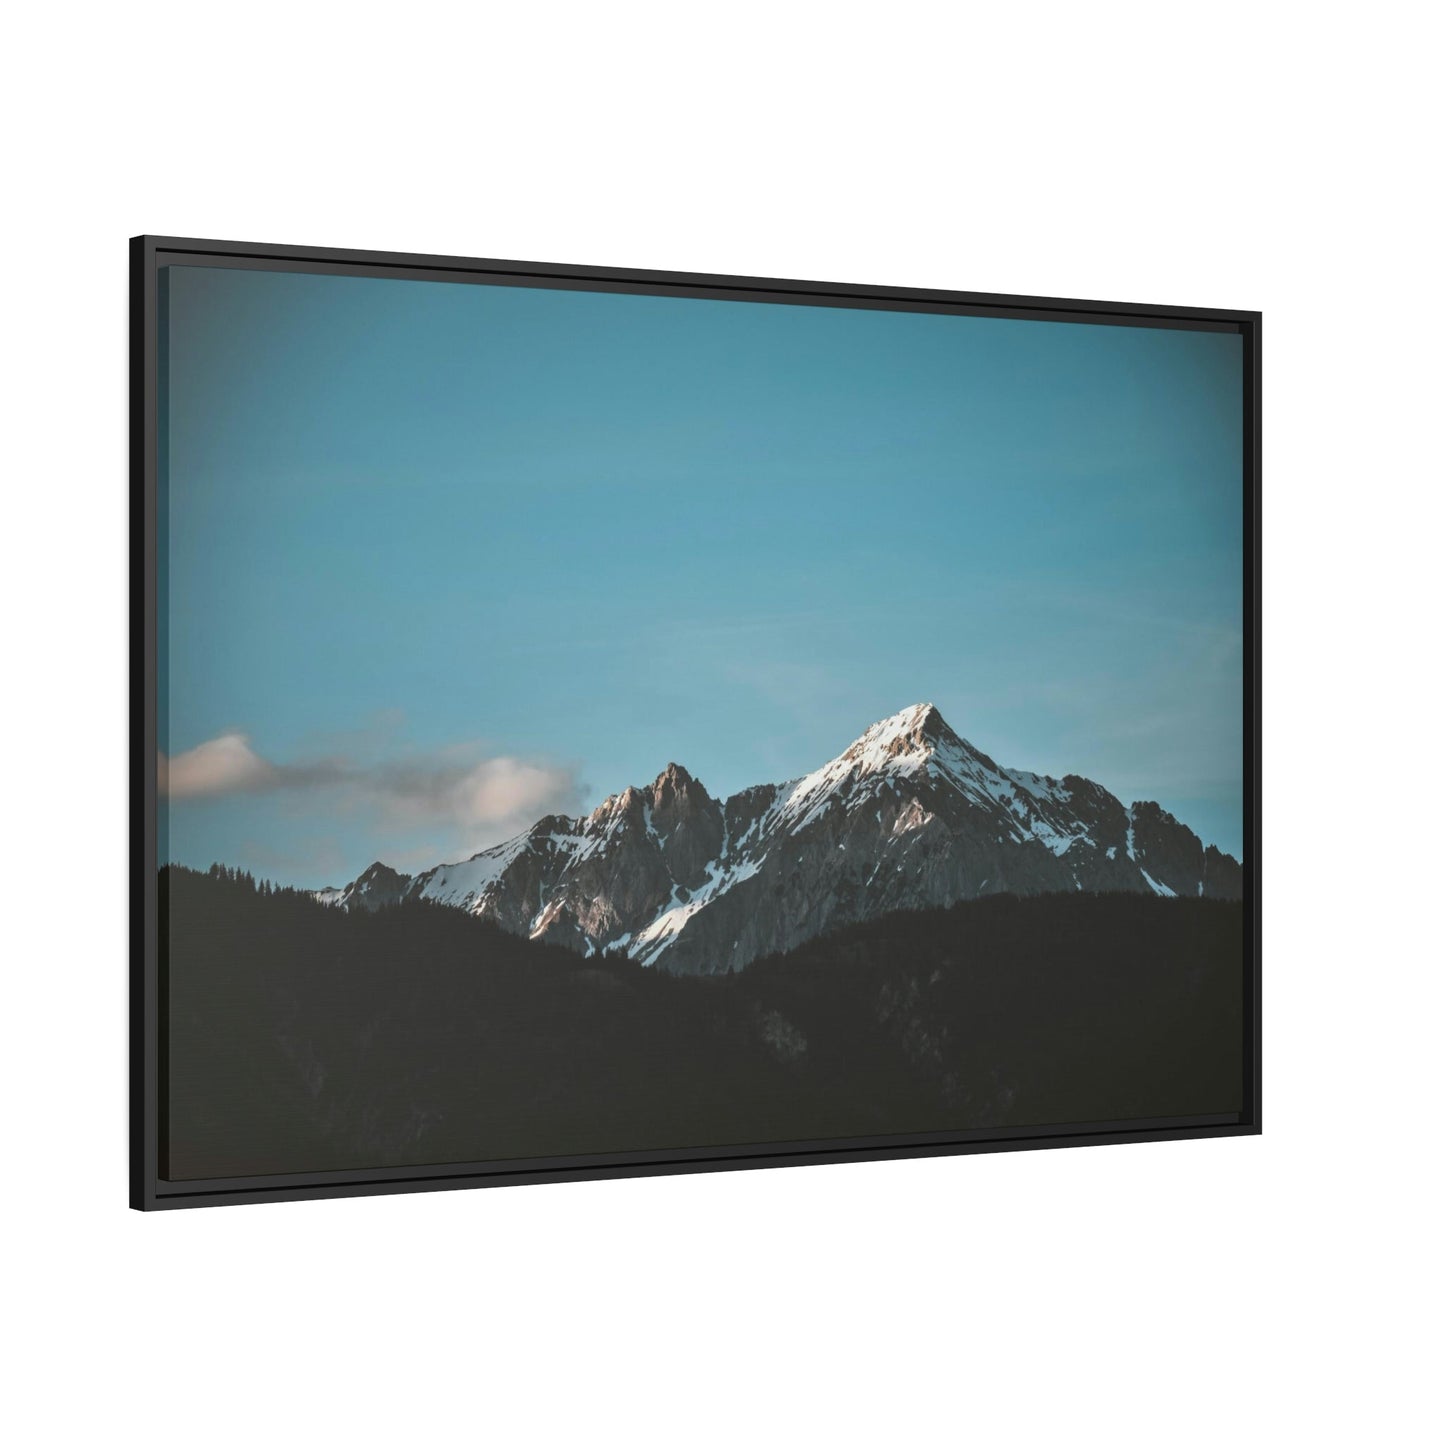 Majestic Peaks: Natural Canvas and Framed Poster of Mountain Ranges